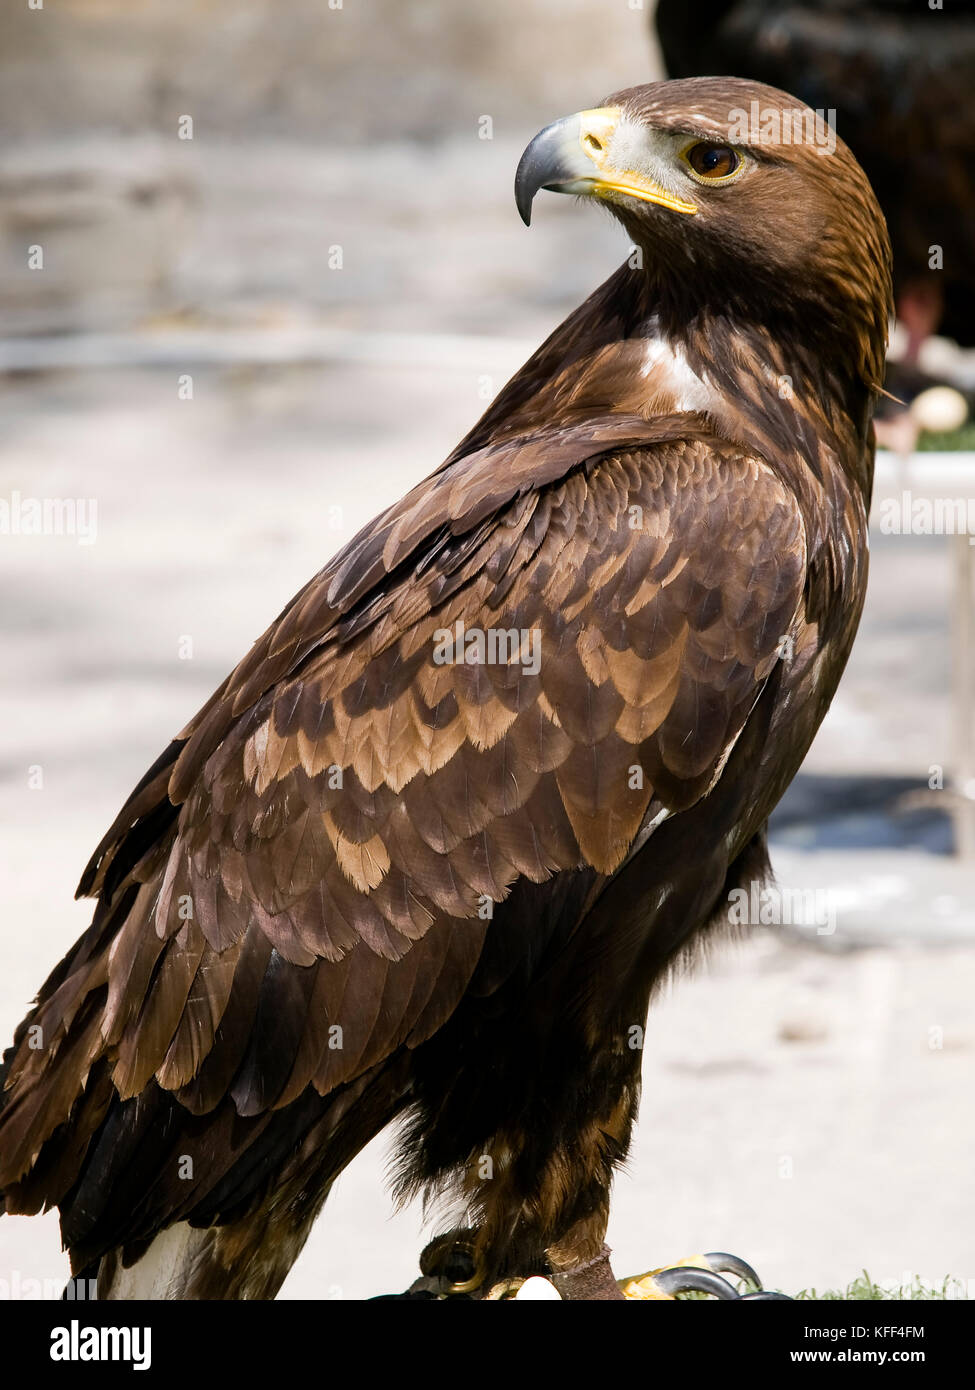 The Beautiful And Endangered Golden Eagle Or Aquila